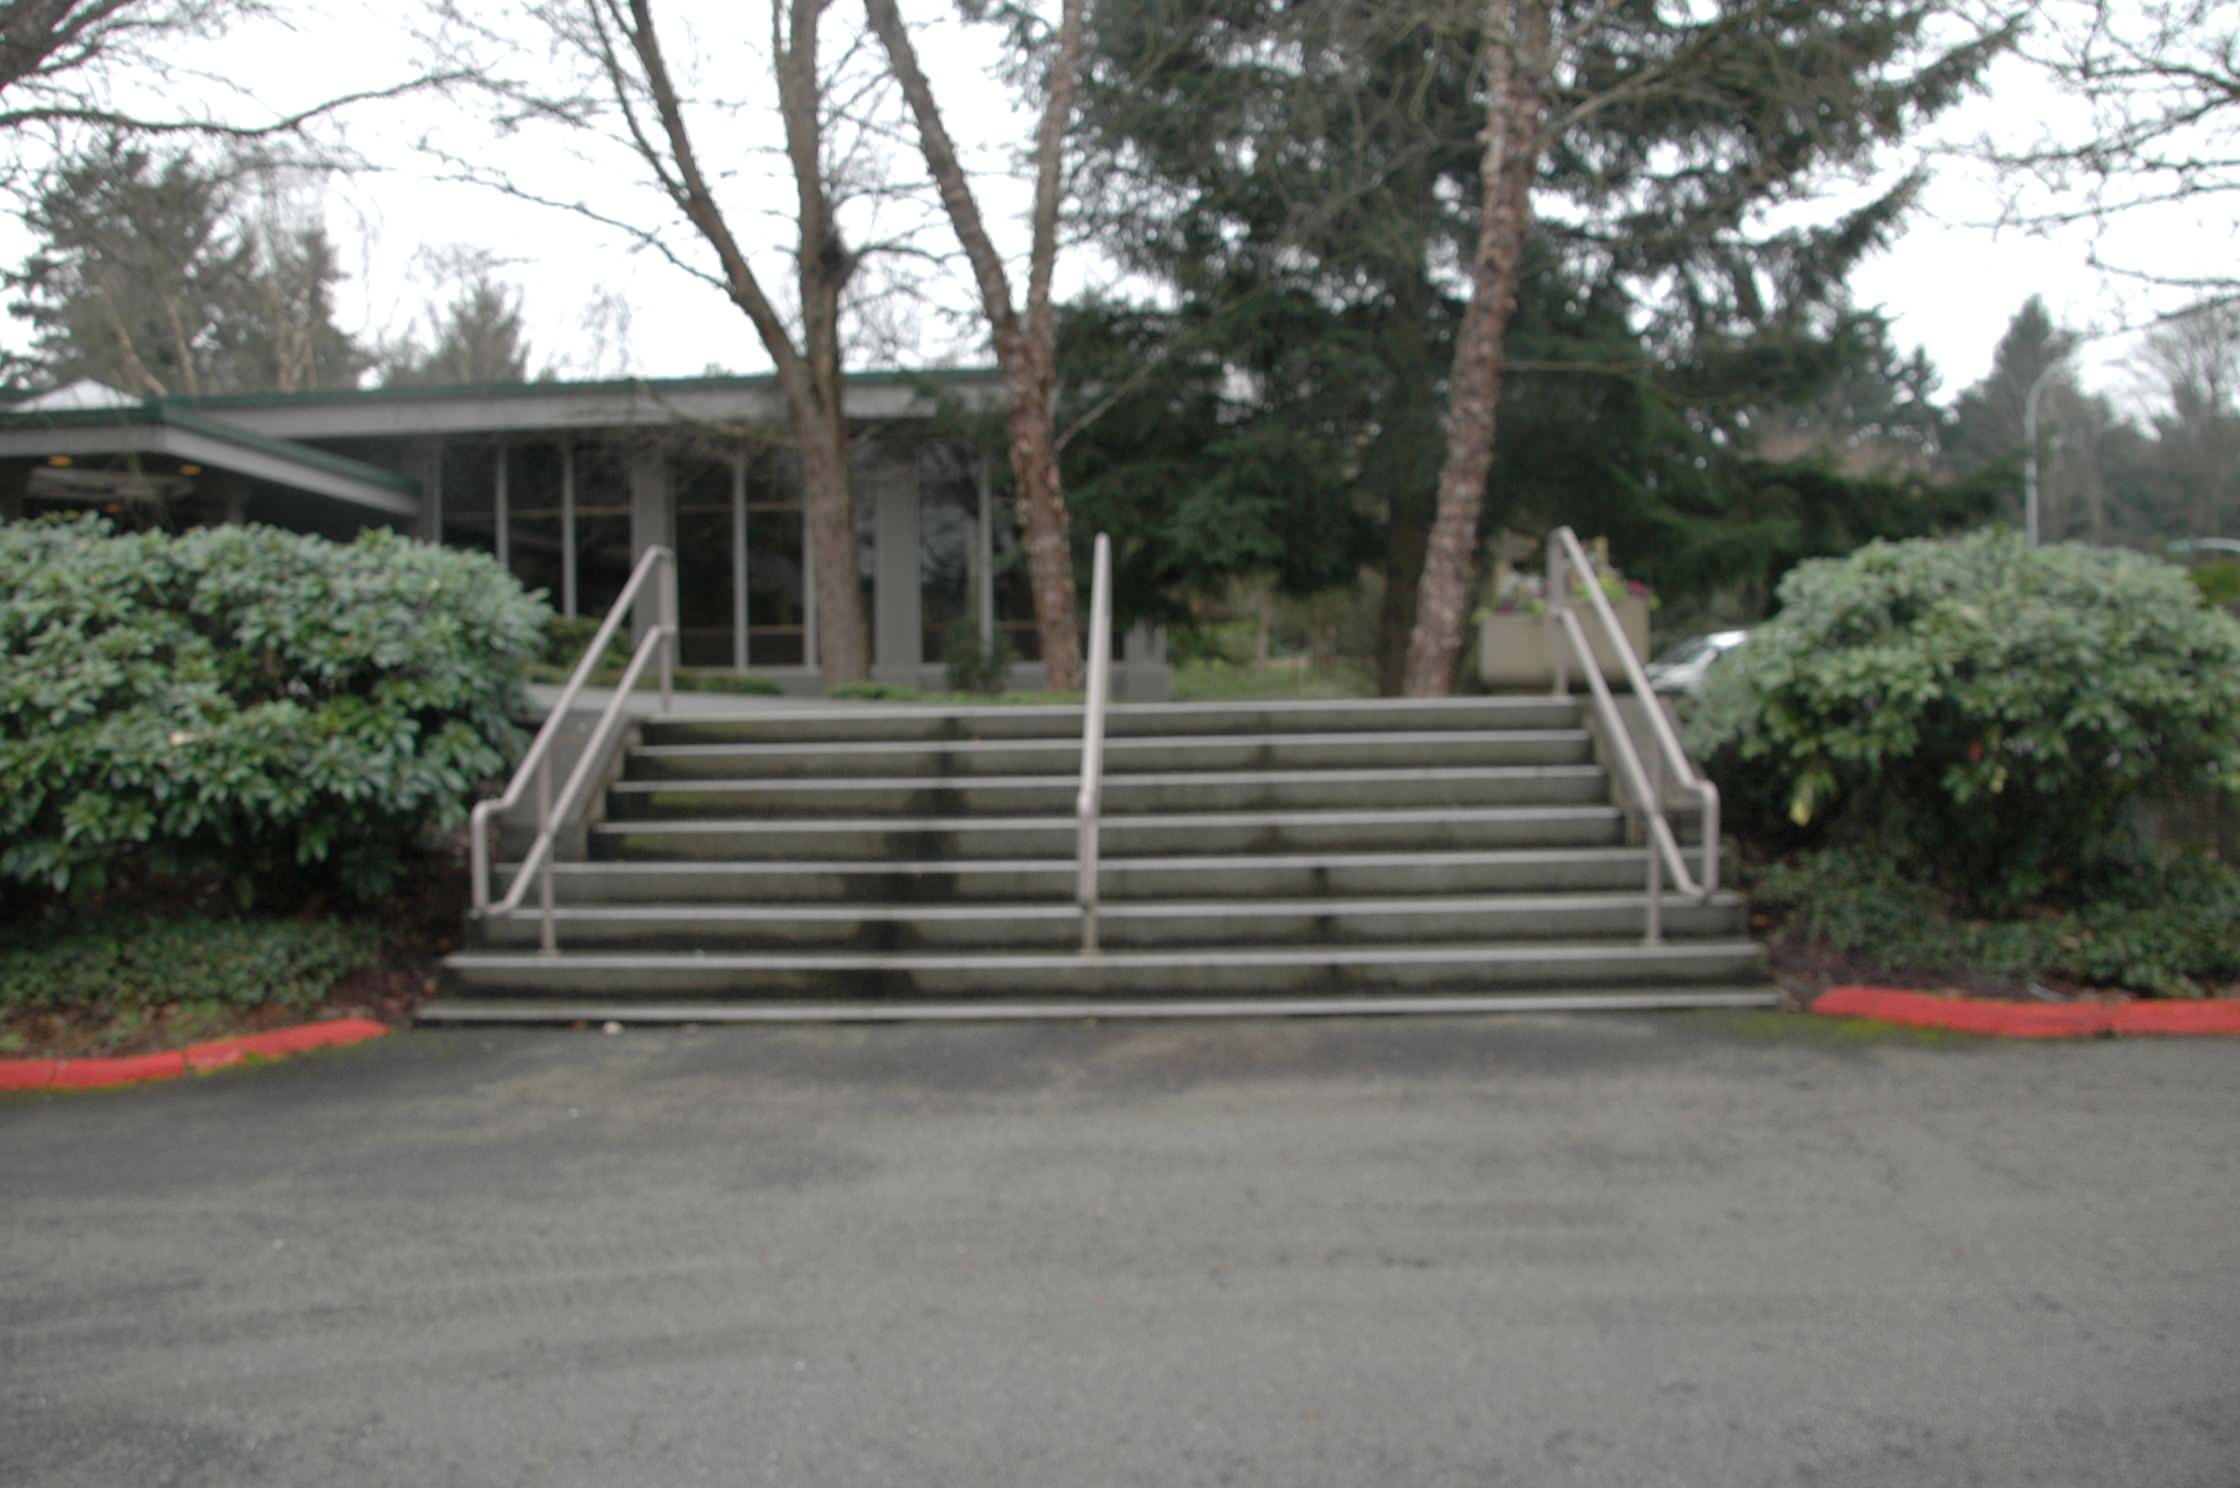 Existing steps at drive